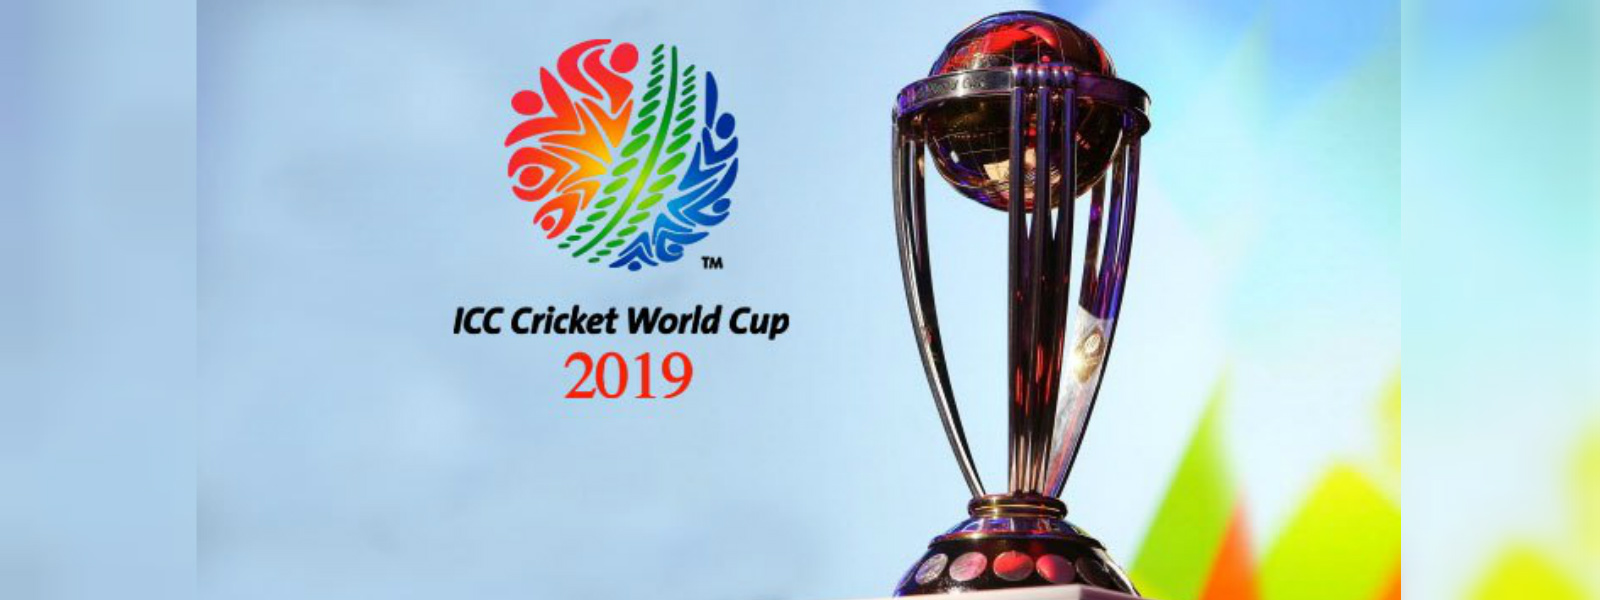 Cricket-World Cup trophy 2019 unveiled in Kolkata